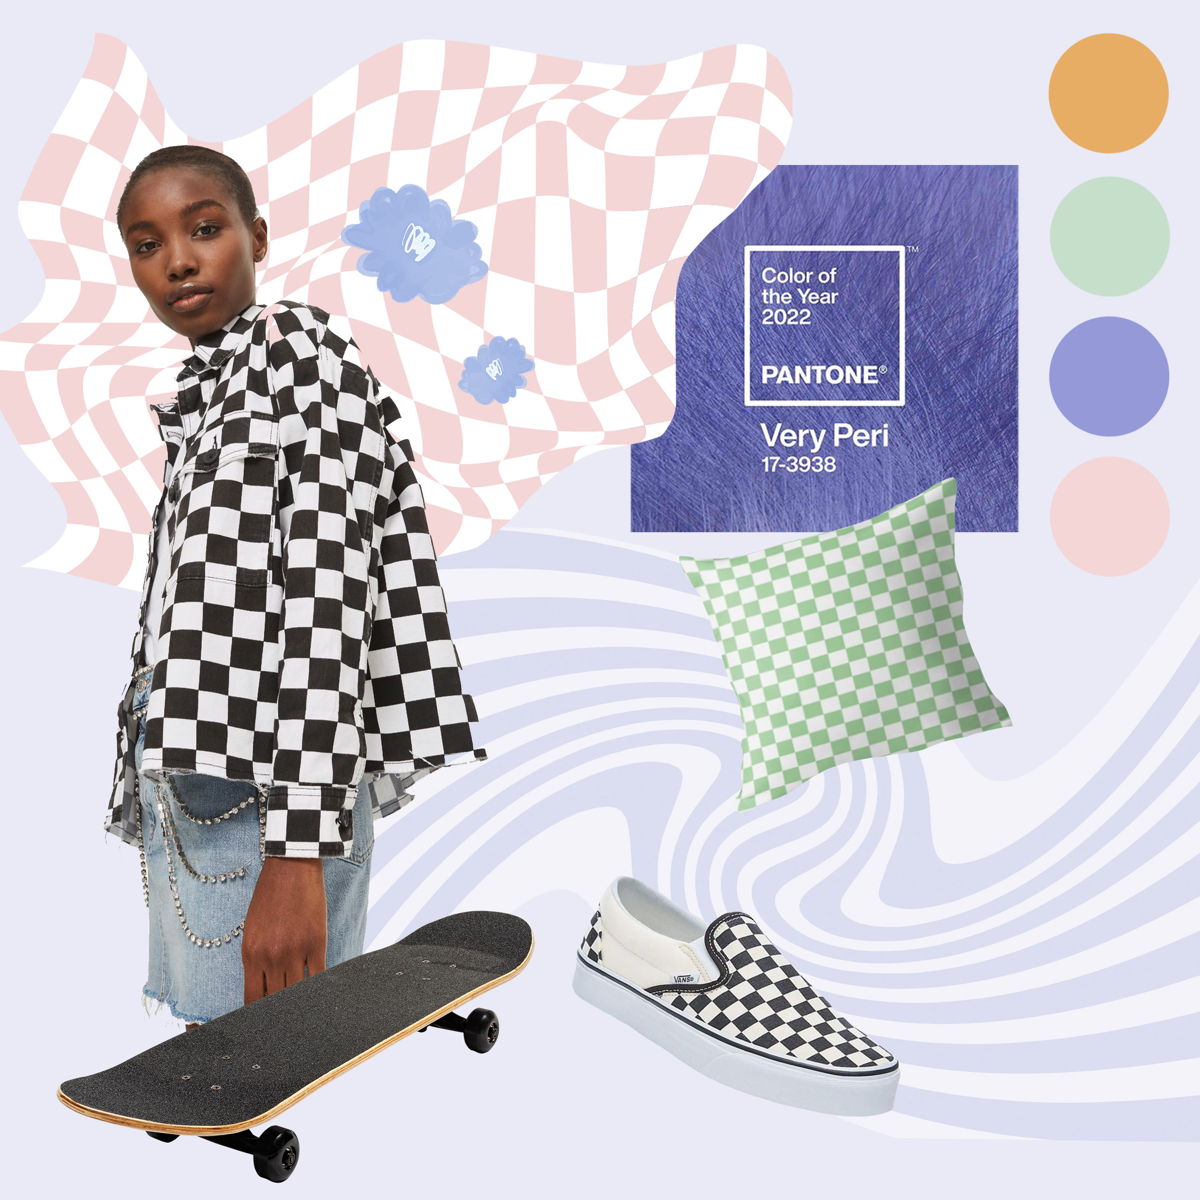 Hovia designer's mood board for the new collection captures the vibe of the checkerboard trend.